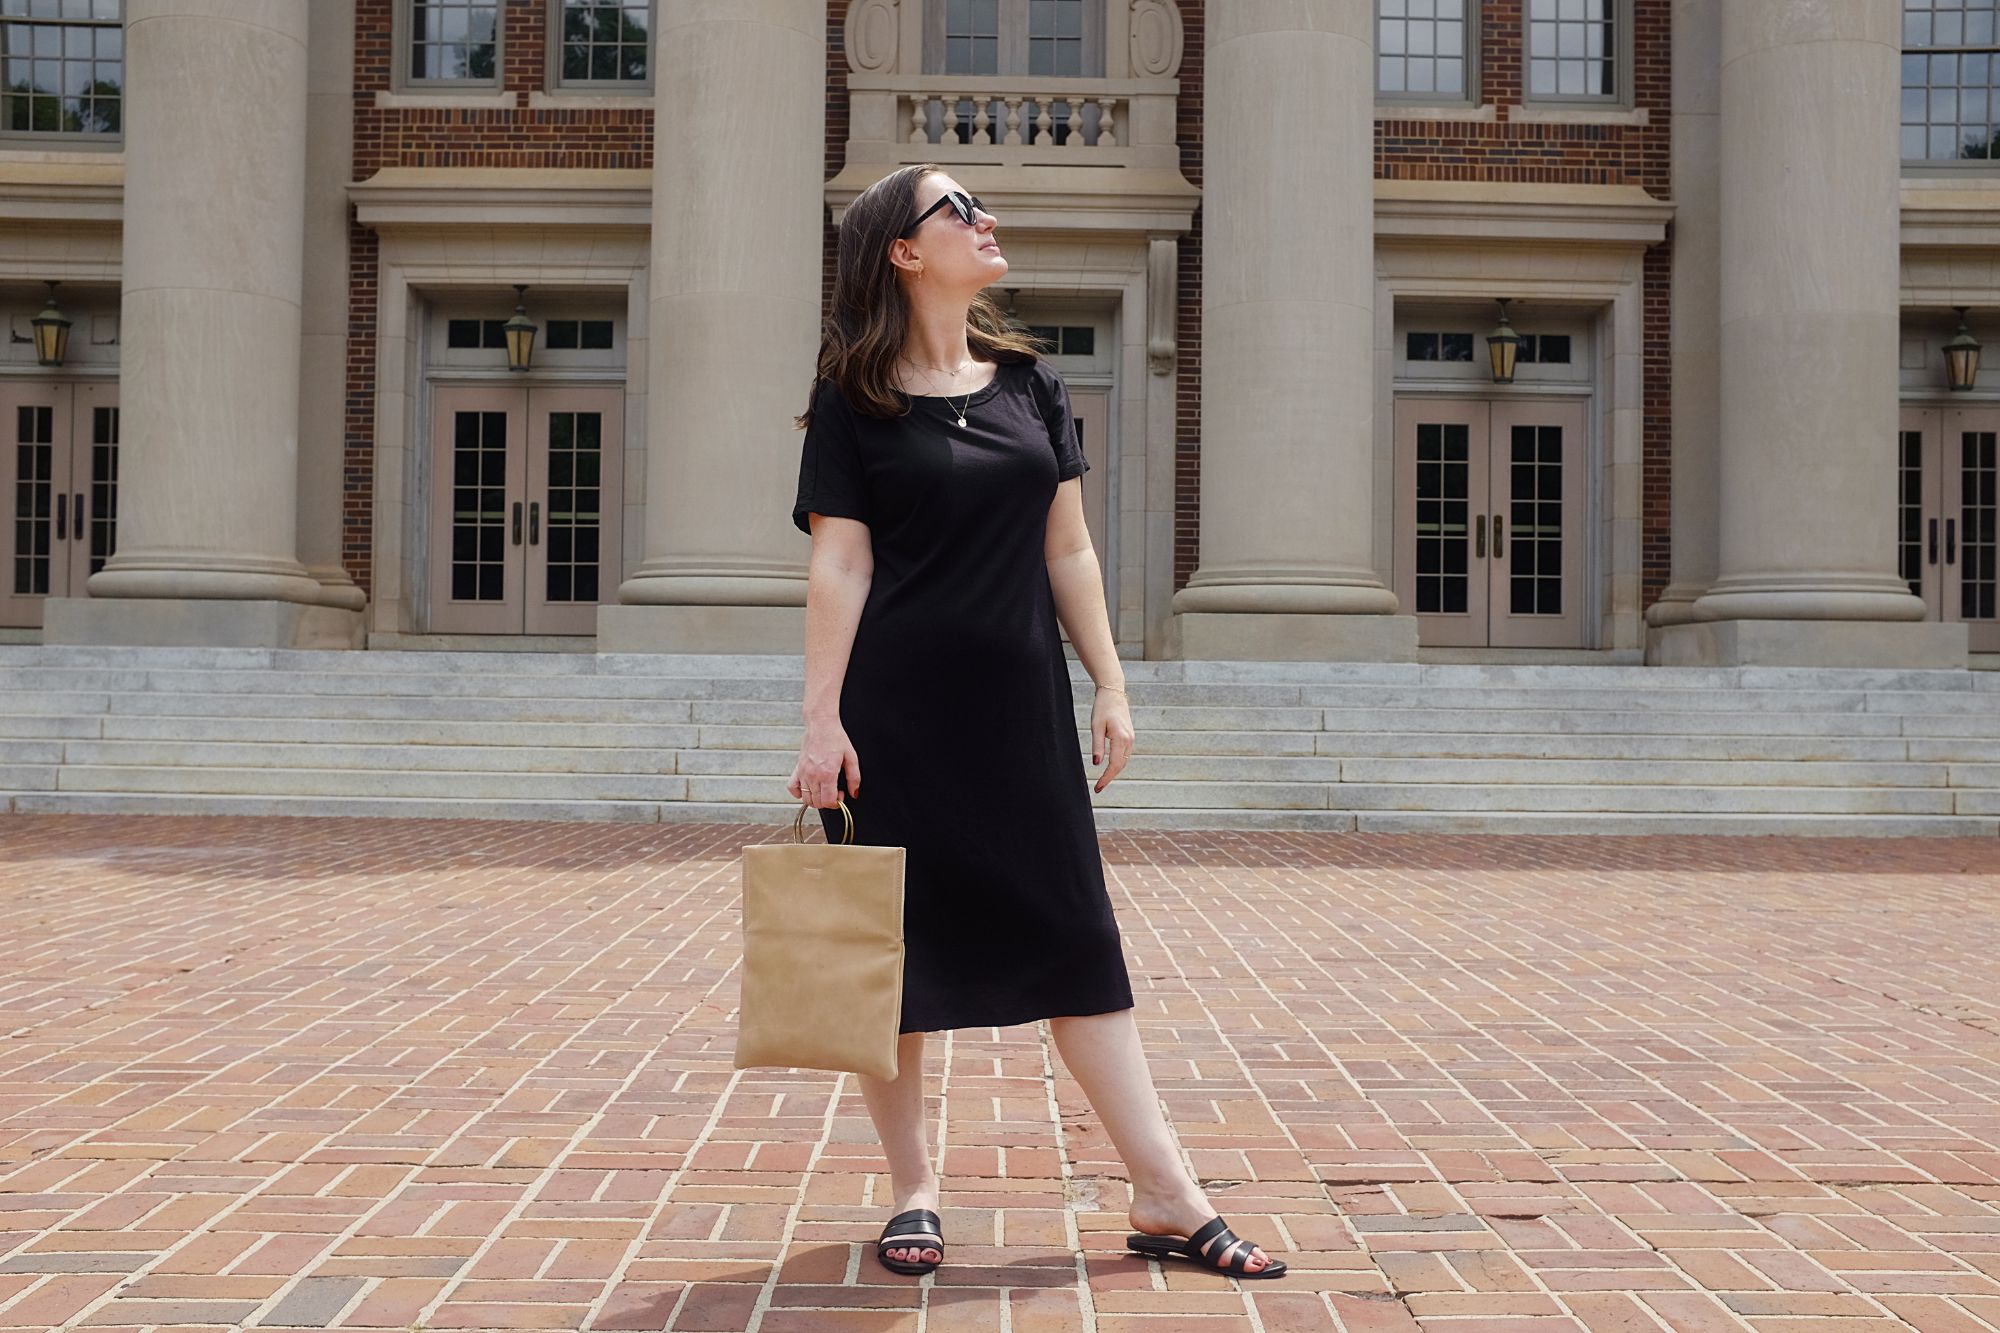 Alyssa stands in front of a column building wearing a black dress and carrying a tan tote